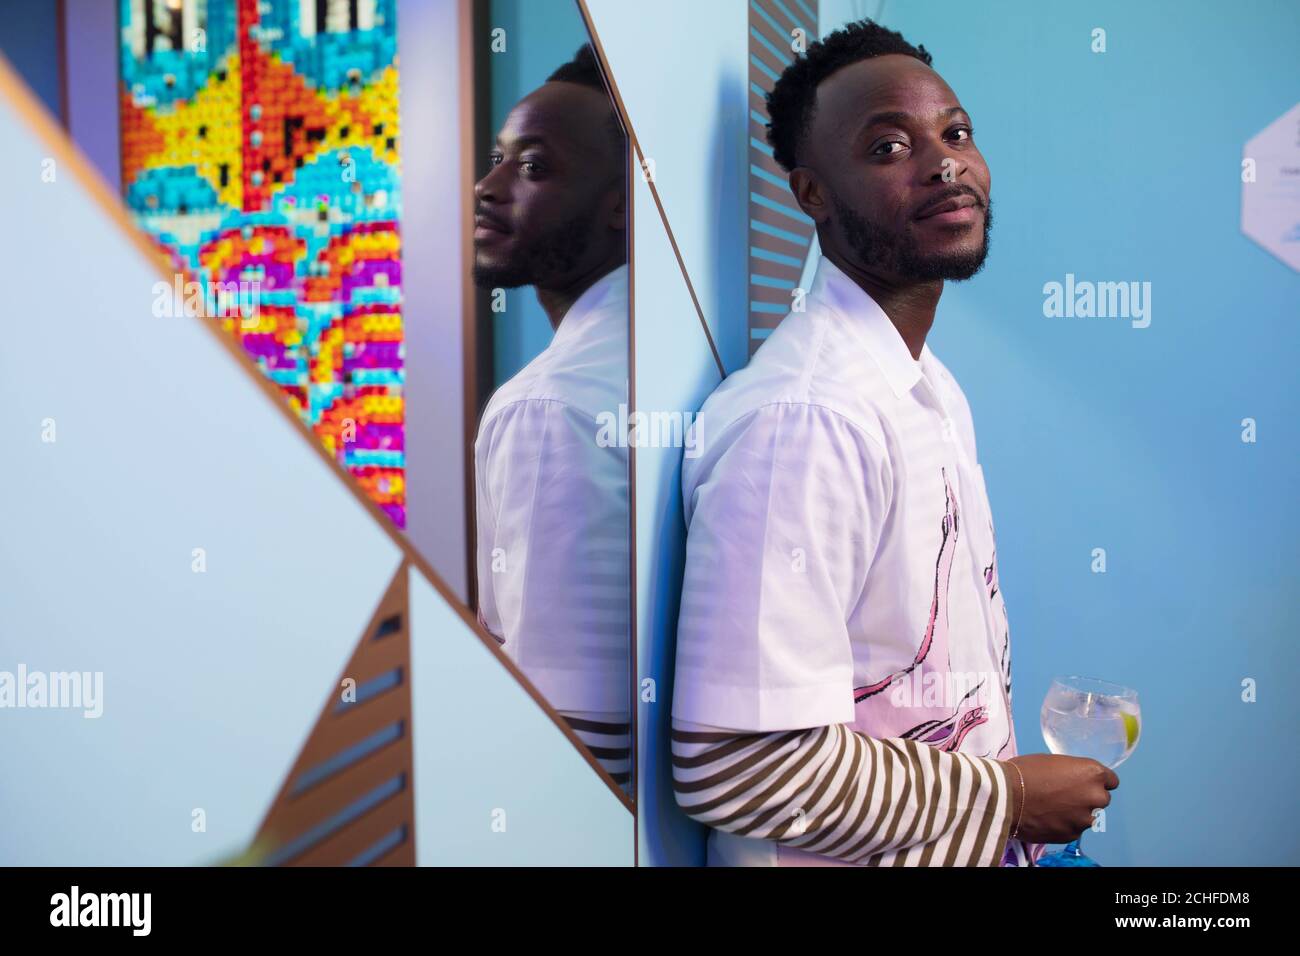 Yinka Ilori with his artwork at the Bombay Sapphire Stir Creativity Lounge at Frieze London, where the gin brand is launching a new Artificial Intelligence art collection in collaboration with artist Yinka Ilori. Stock Photo